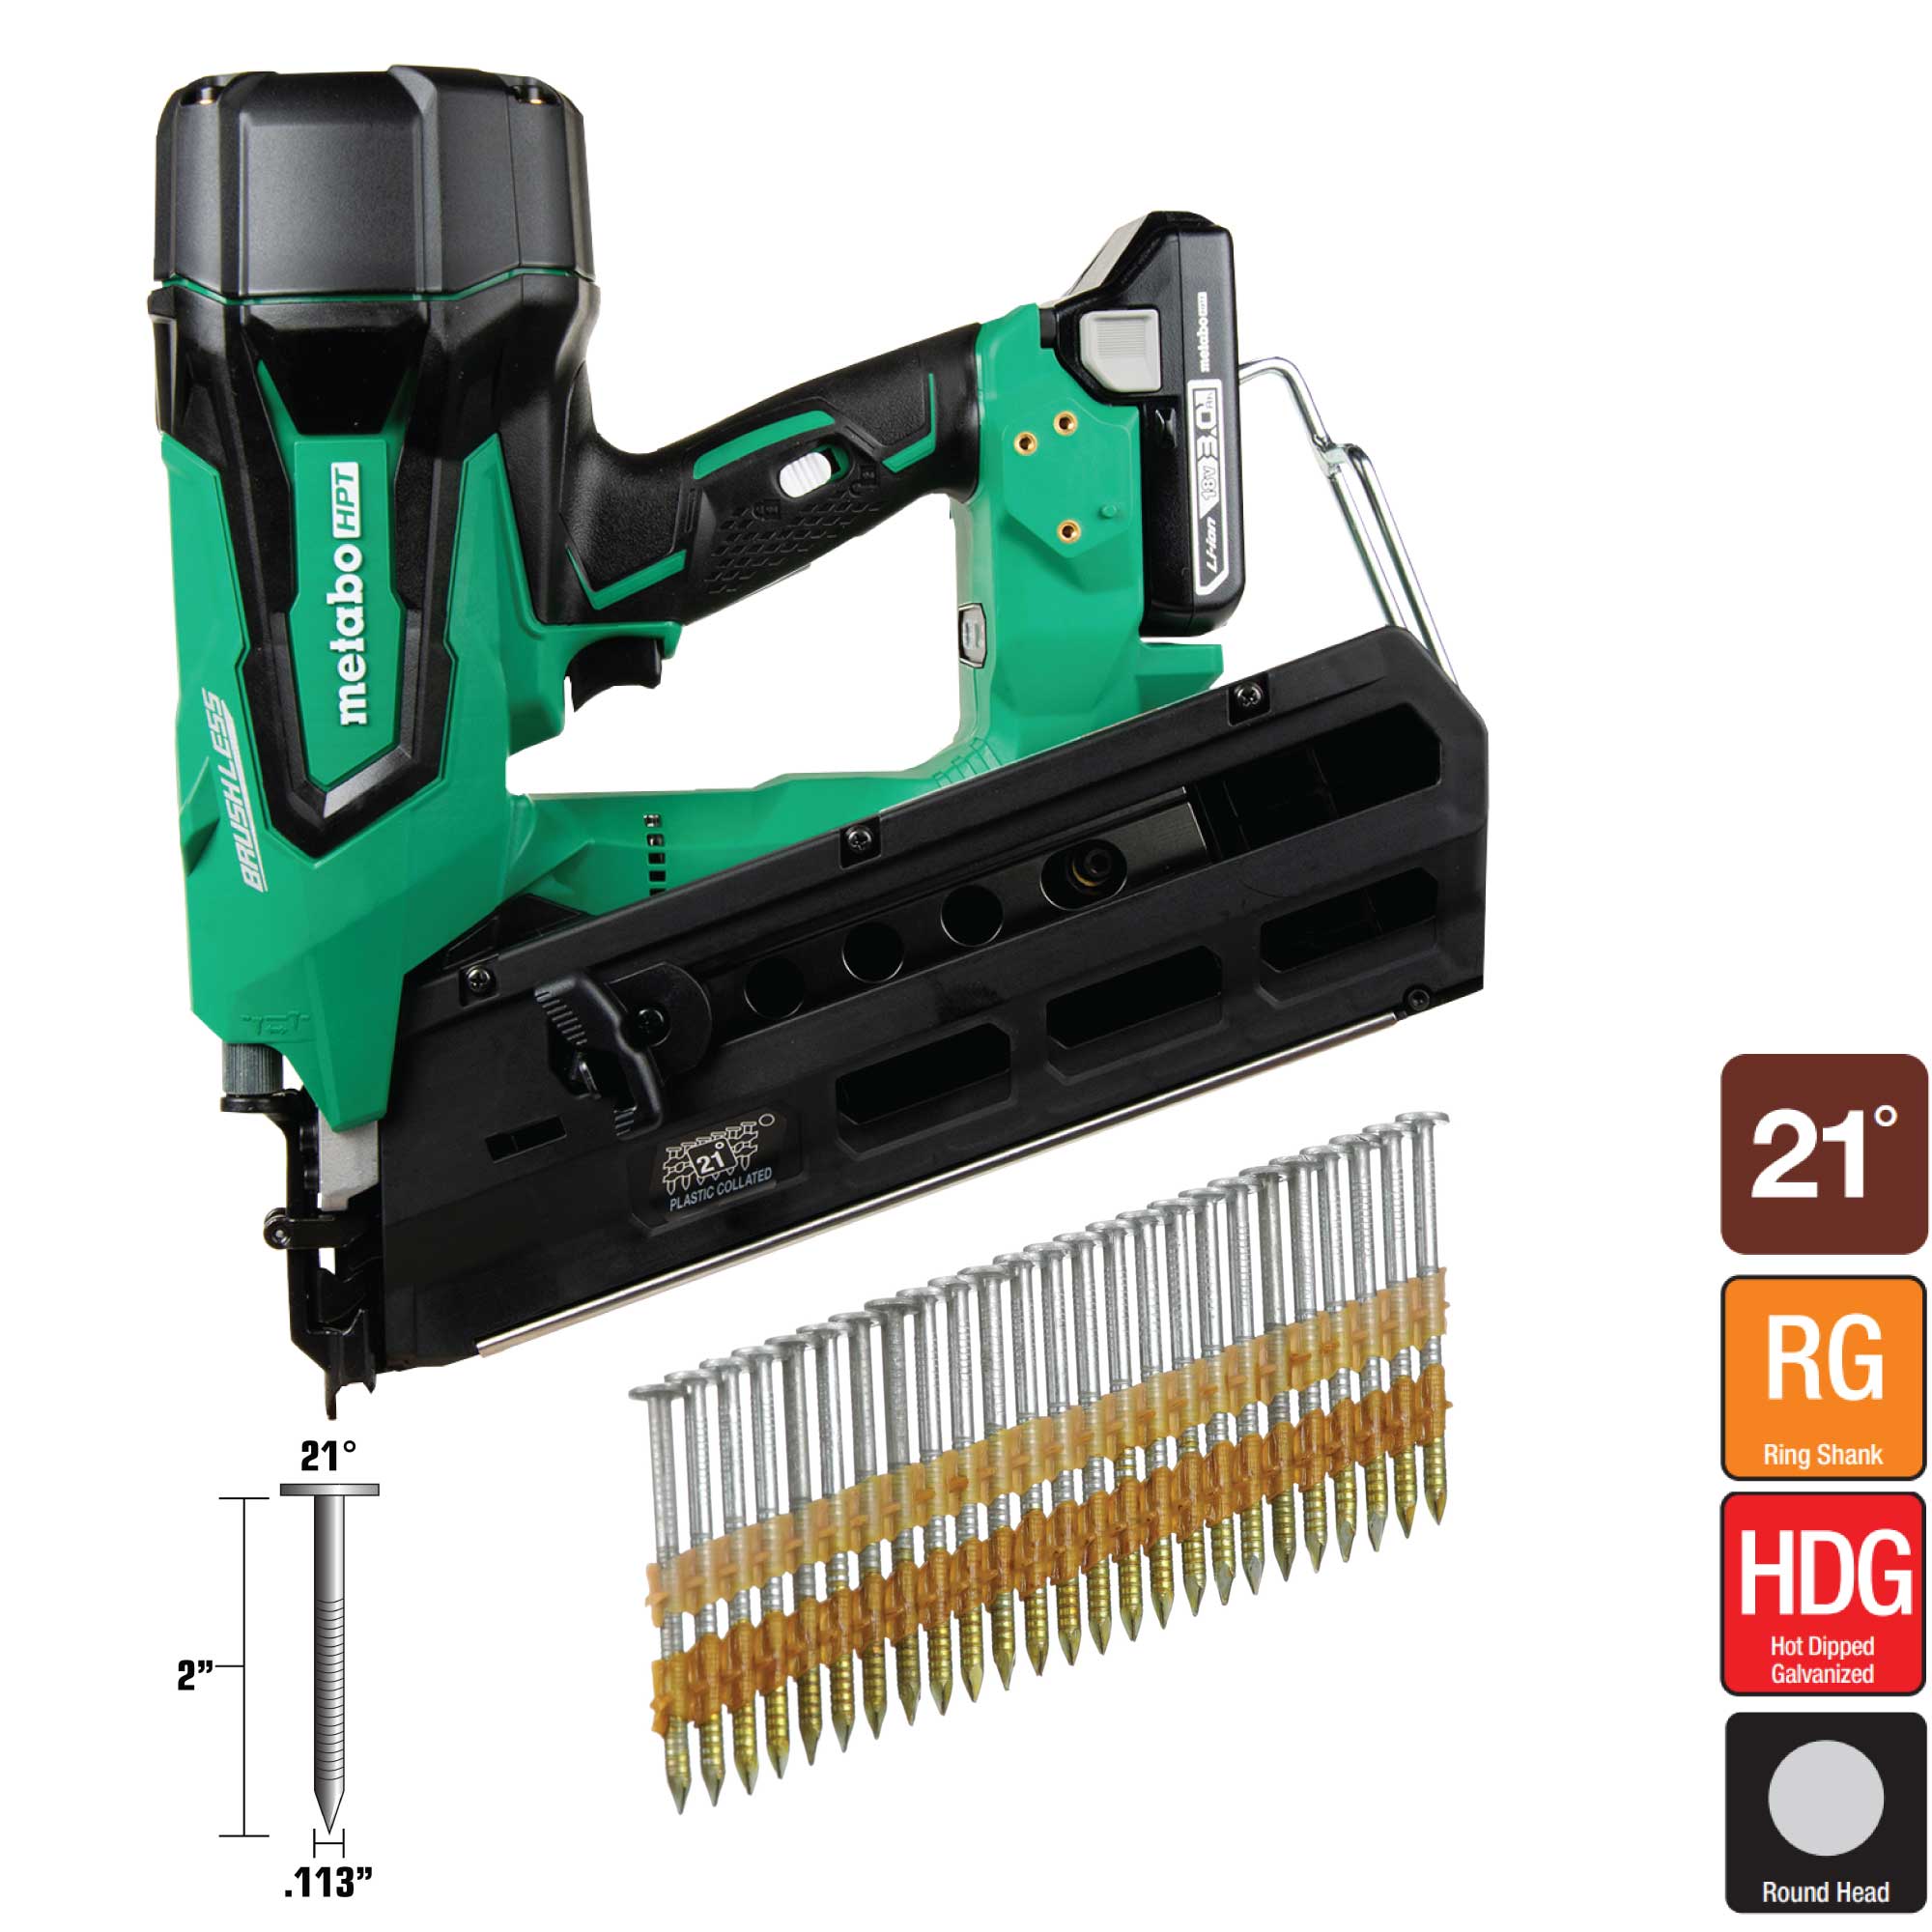 Metabo HPT 2-in 21-Gauge 21 Hot-Dipped Galvanized Steel Collated Framing Nails (1000-Pieces) with Metabo HPT 21-Degree 18-Volt Cordless Framing Nailer